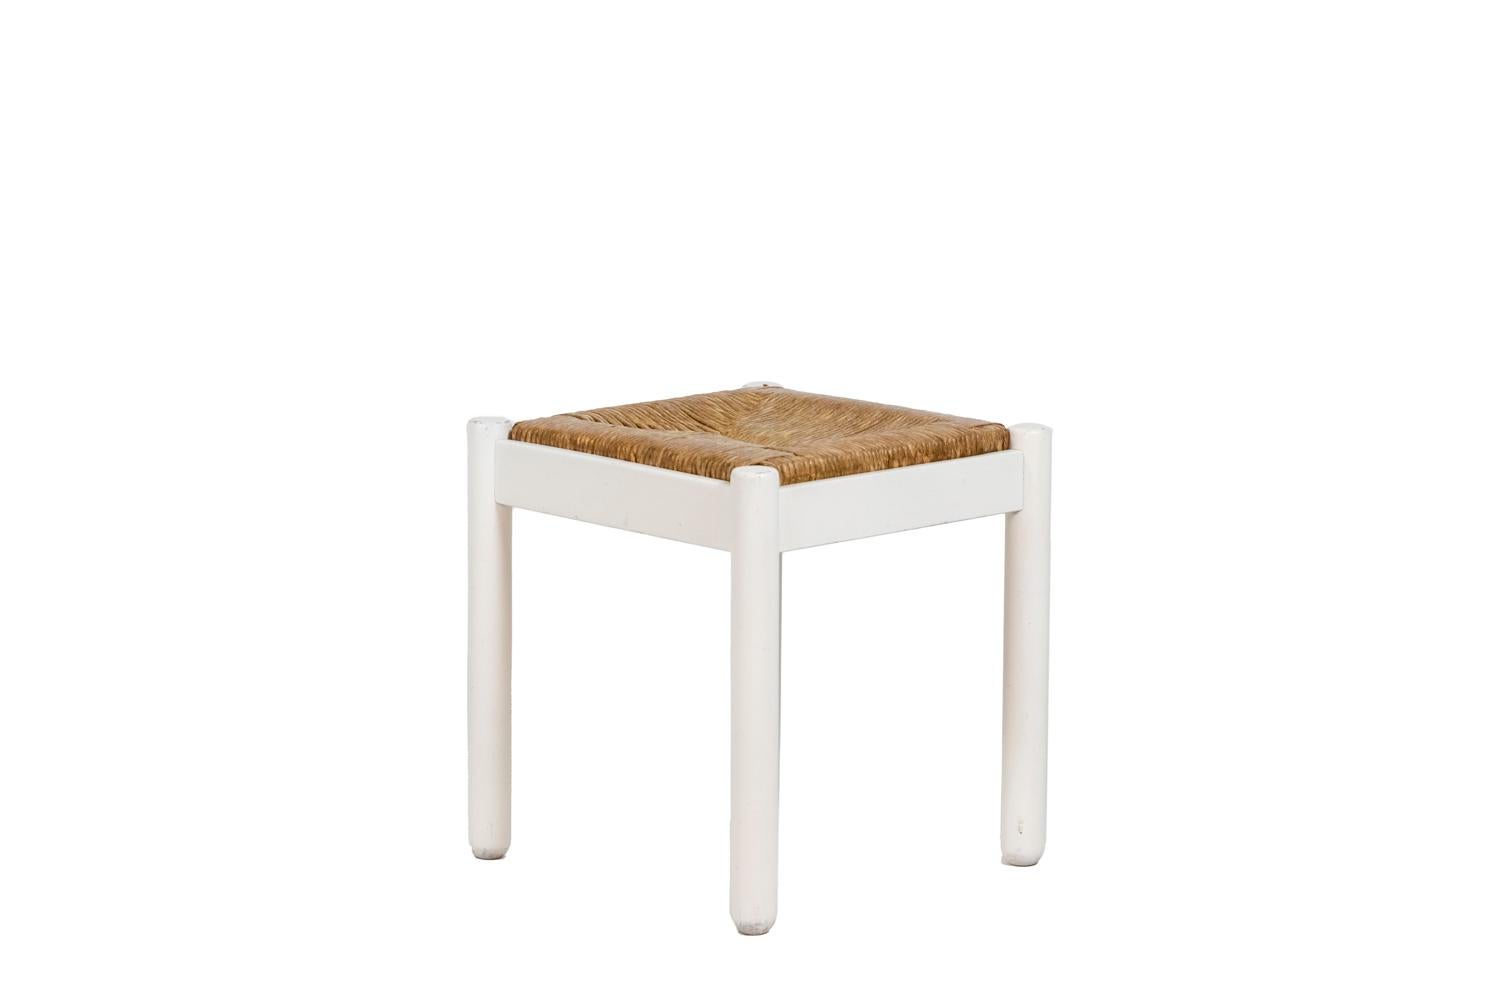 Pair of stools in lacquered wood stools in square shape and white color. Seat in straw.

Work realized in the 1970s.